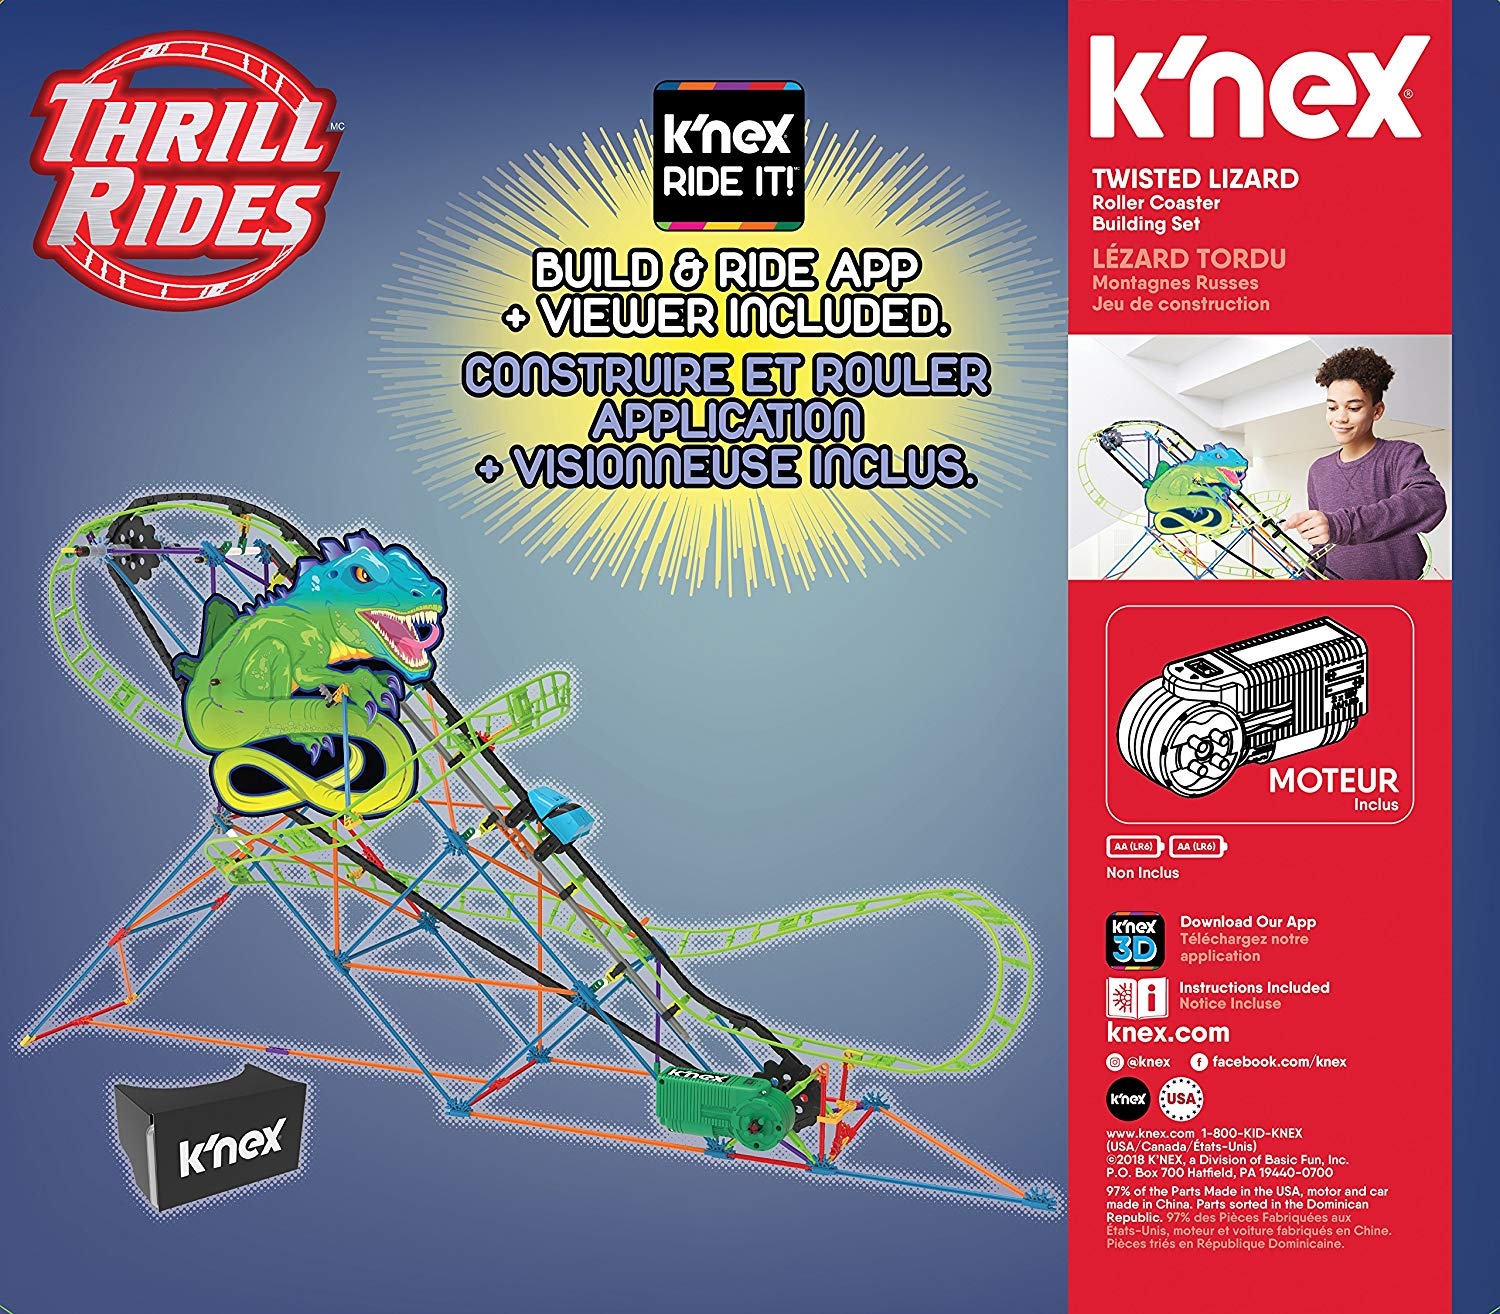 K'nex Thrill Rides Twisted Lizard Roller Coaster Building Set with Ride It App, Ages Classic Thrill Rides (New Open Box) - image 3 of 3